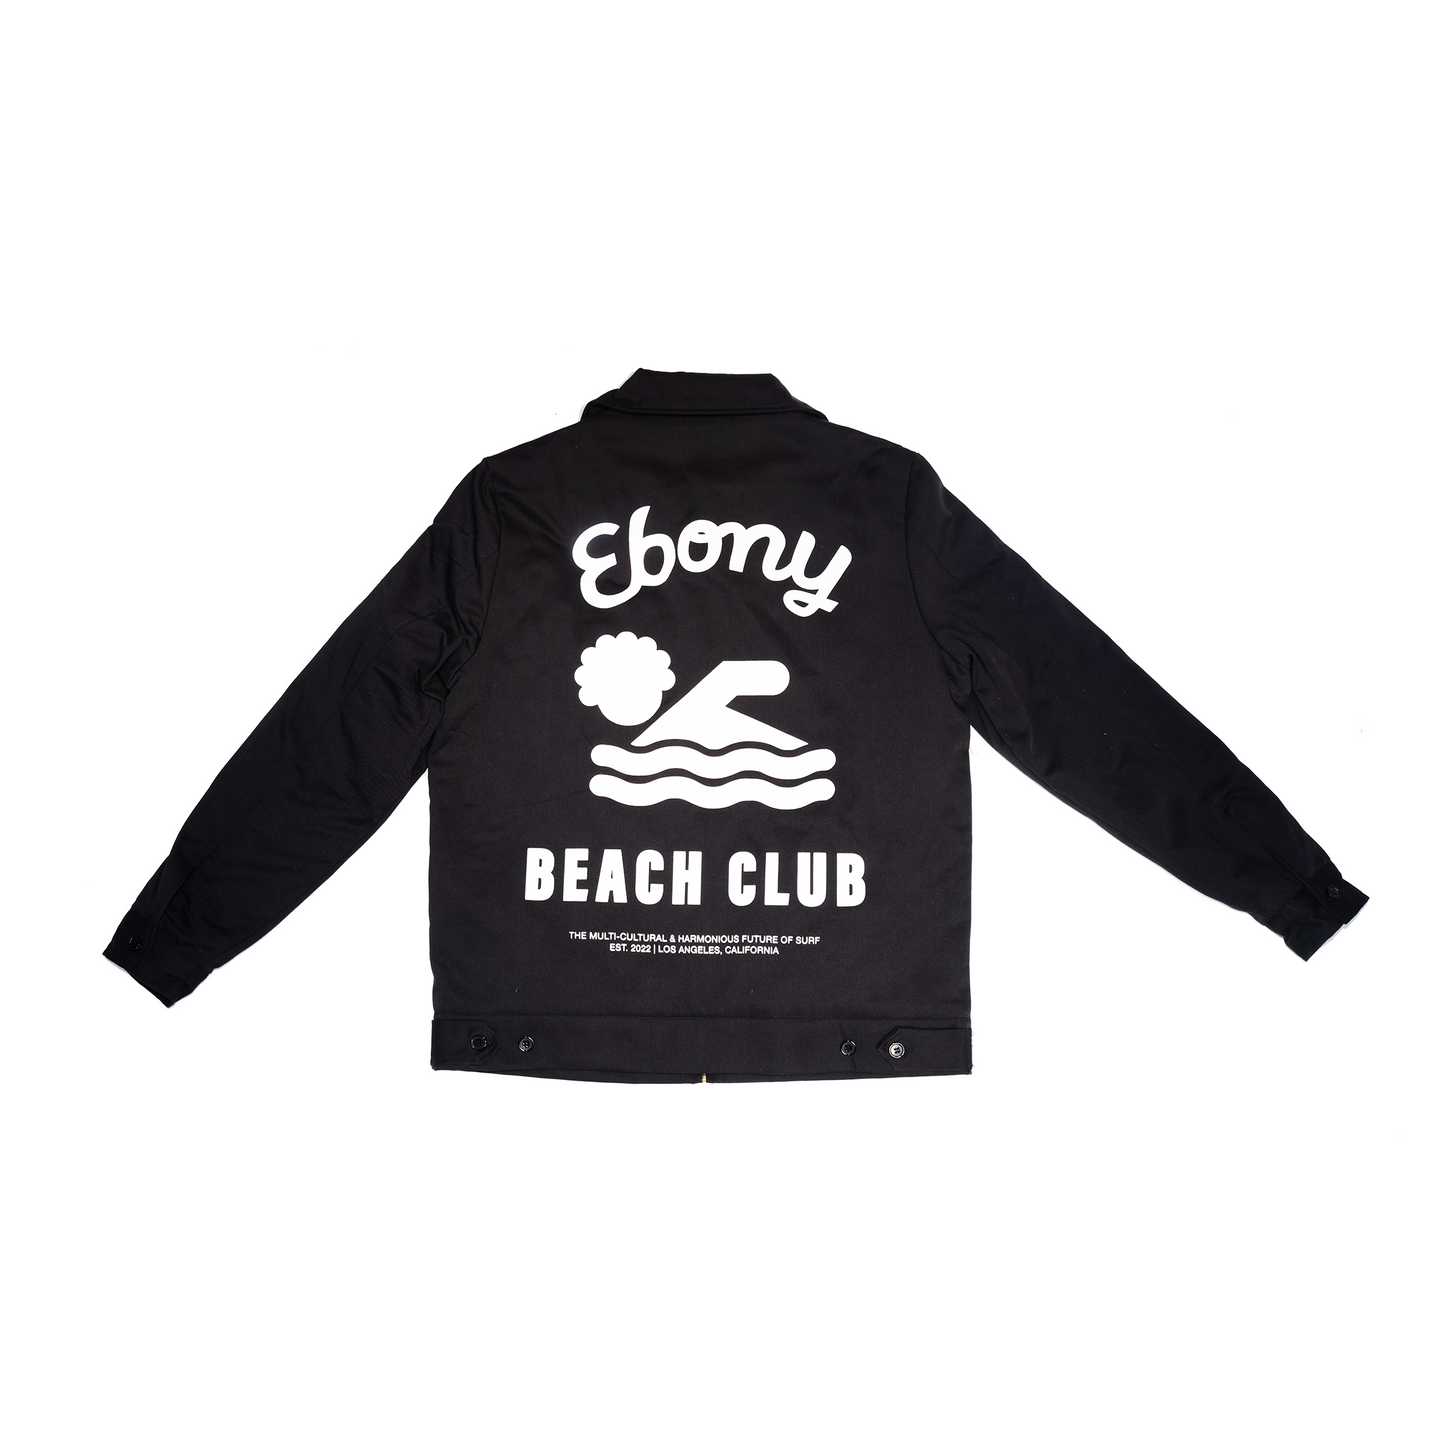 "Members Only" Jacket